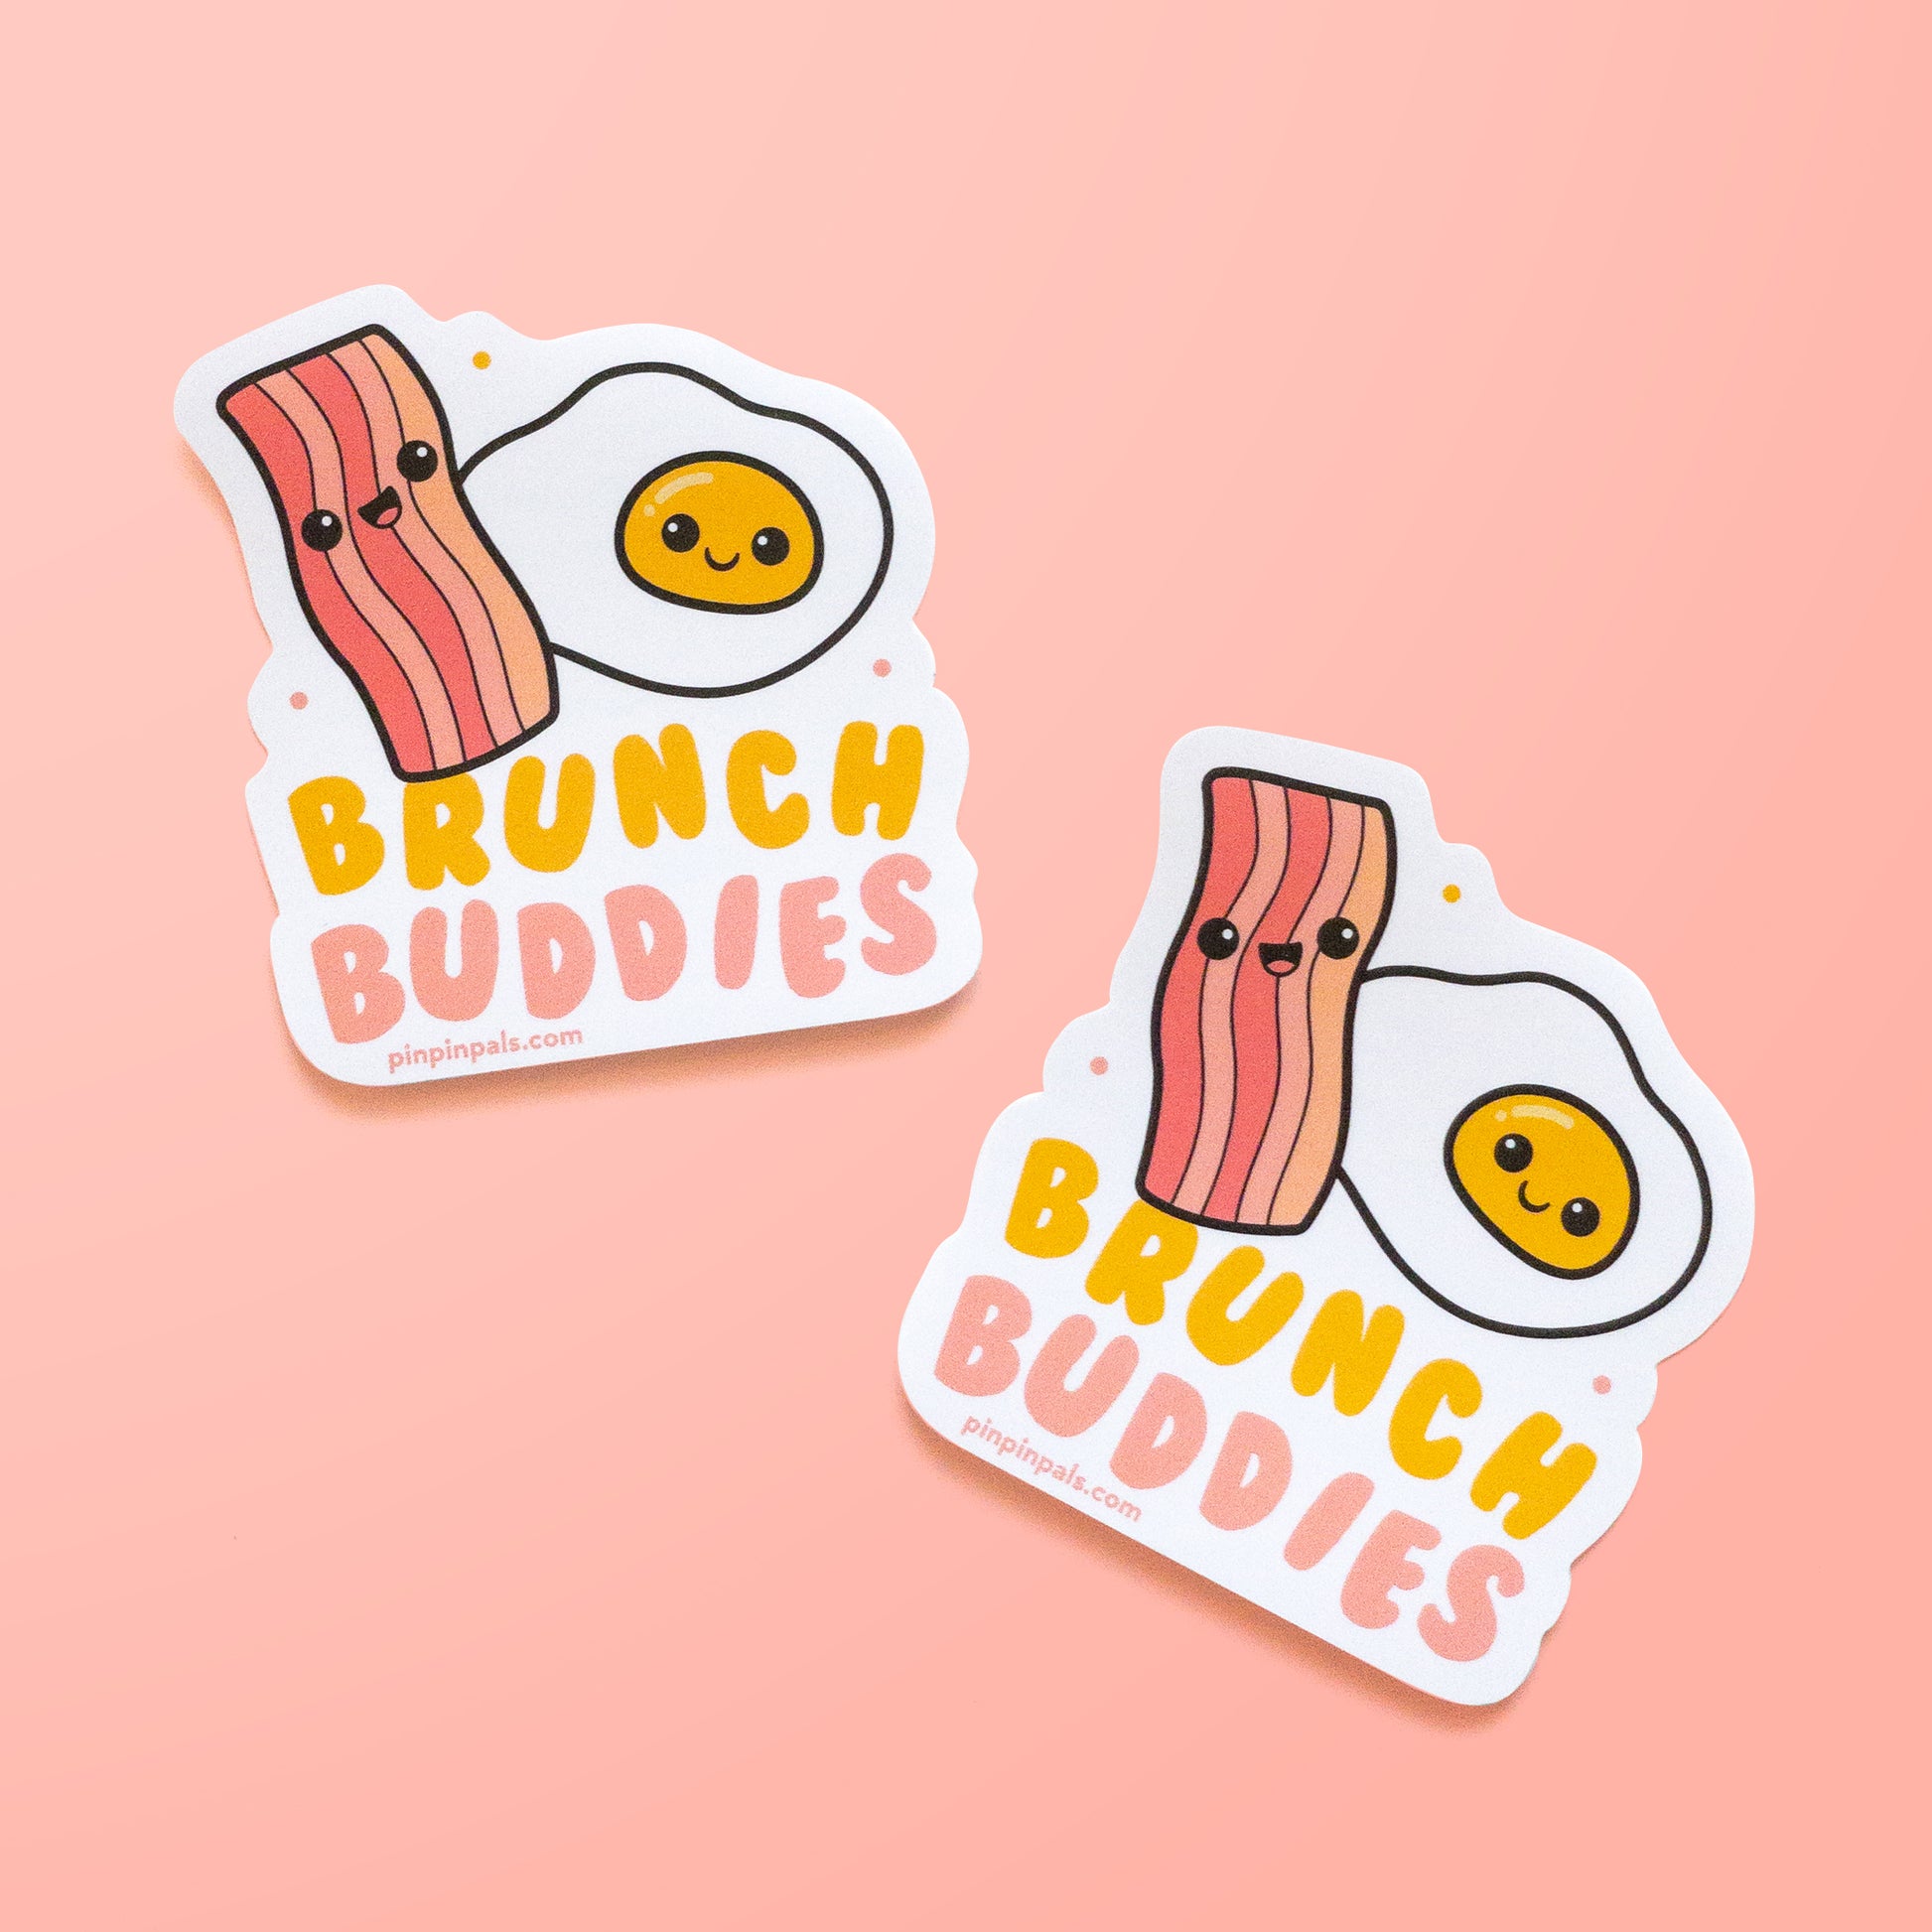 Two Brunch Buddies - egg and bacon vinyl stickers on pink background